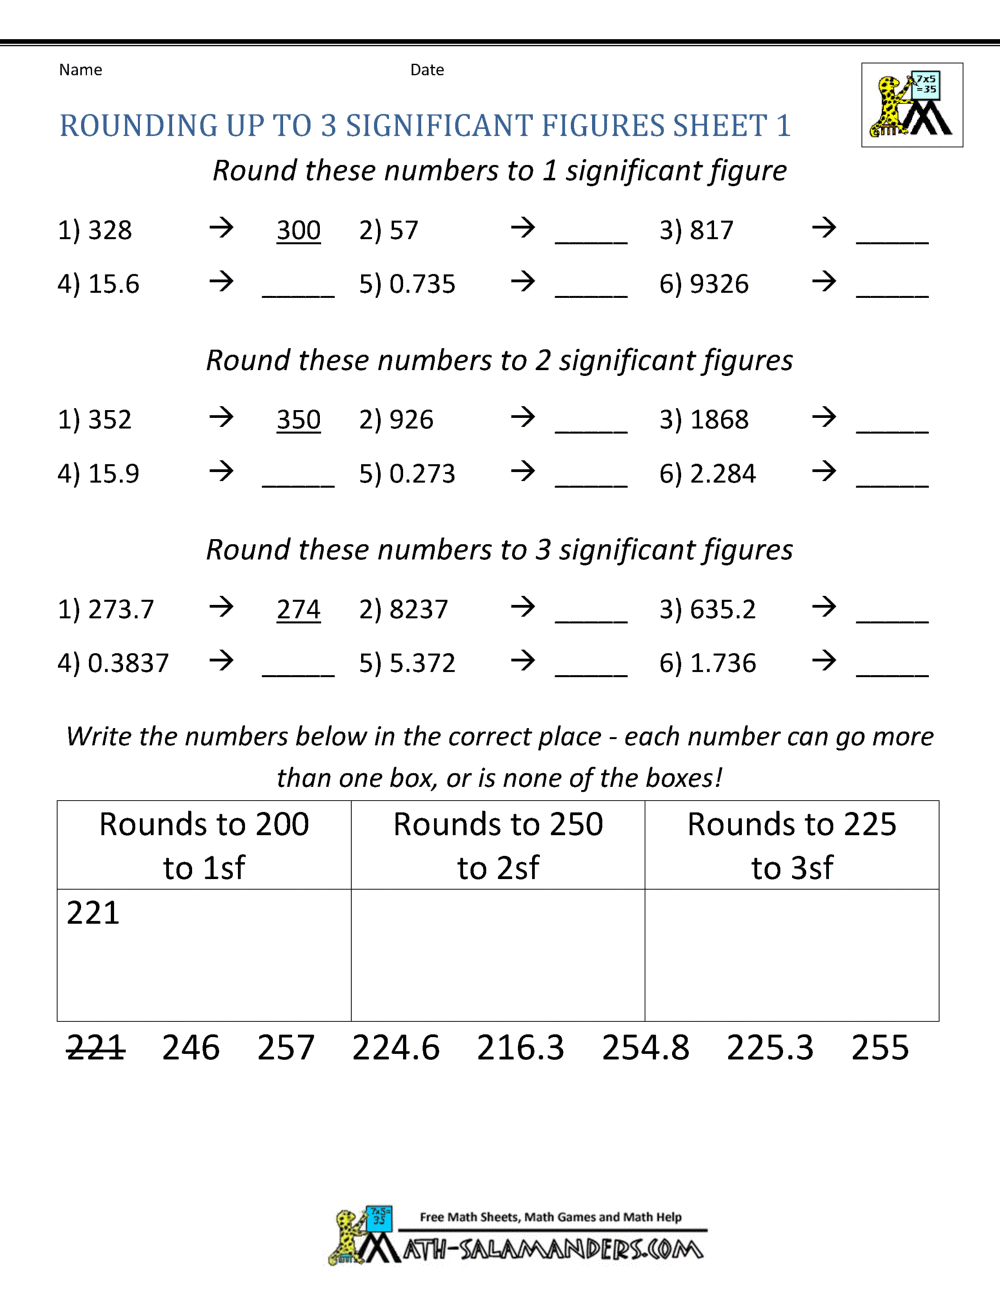 Rounding Significant Figures Pertaining To Significant Figures Practice Worksheet